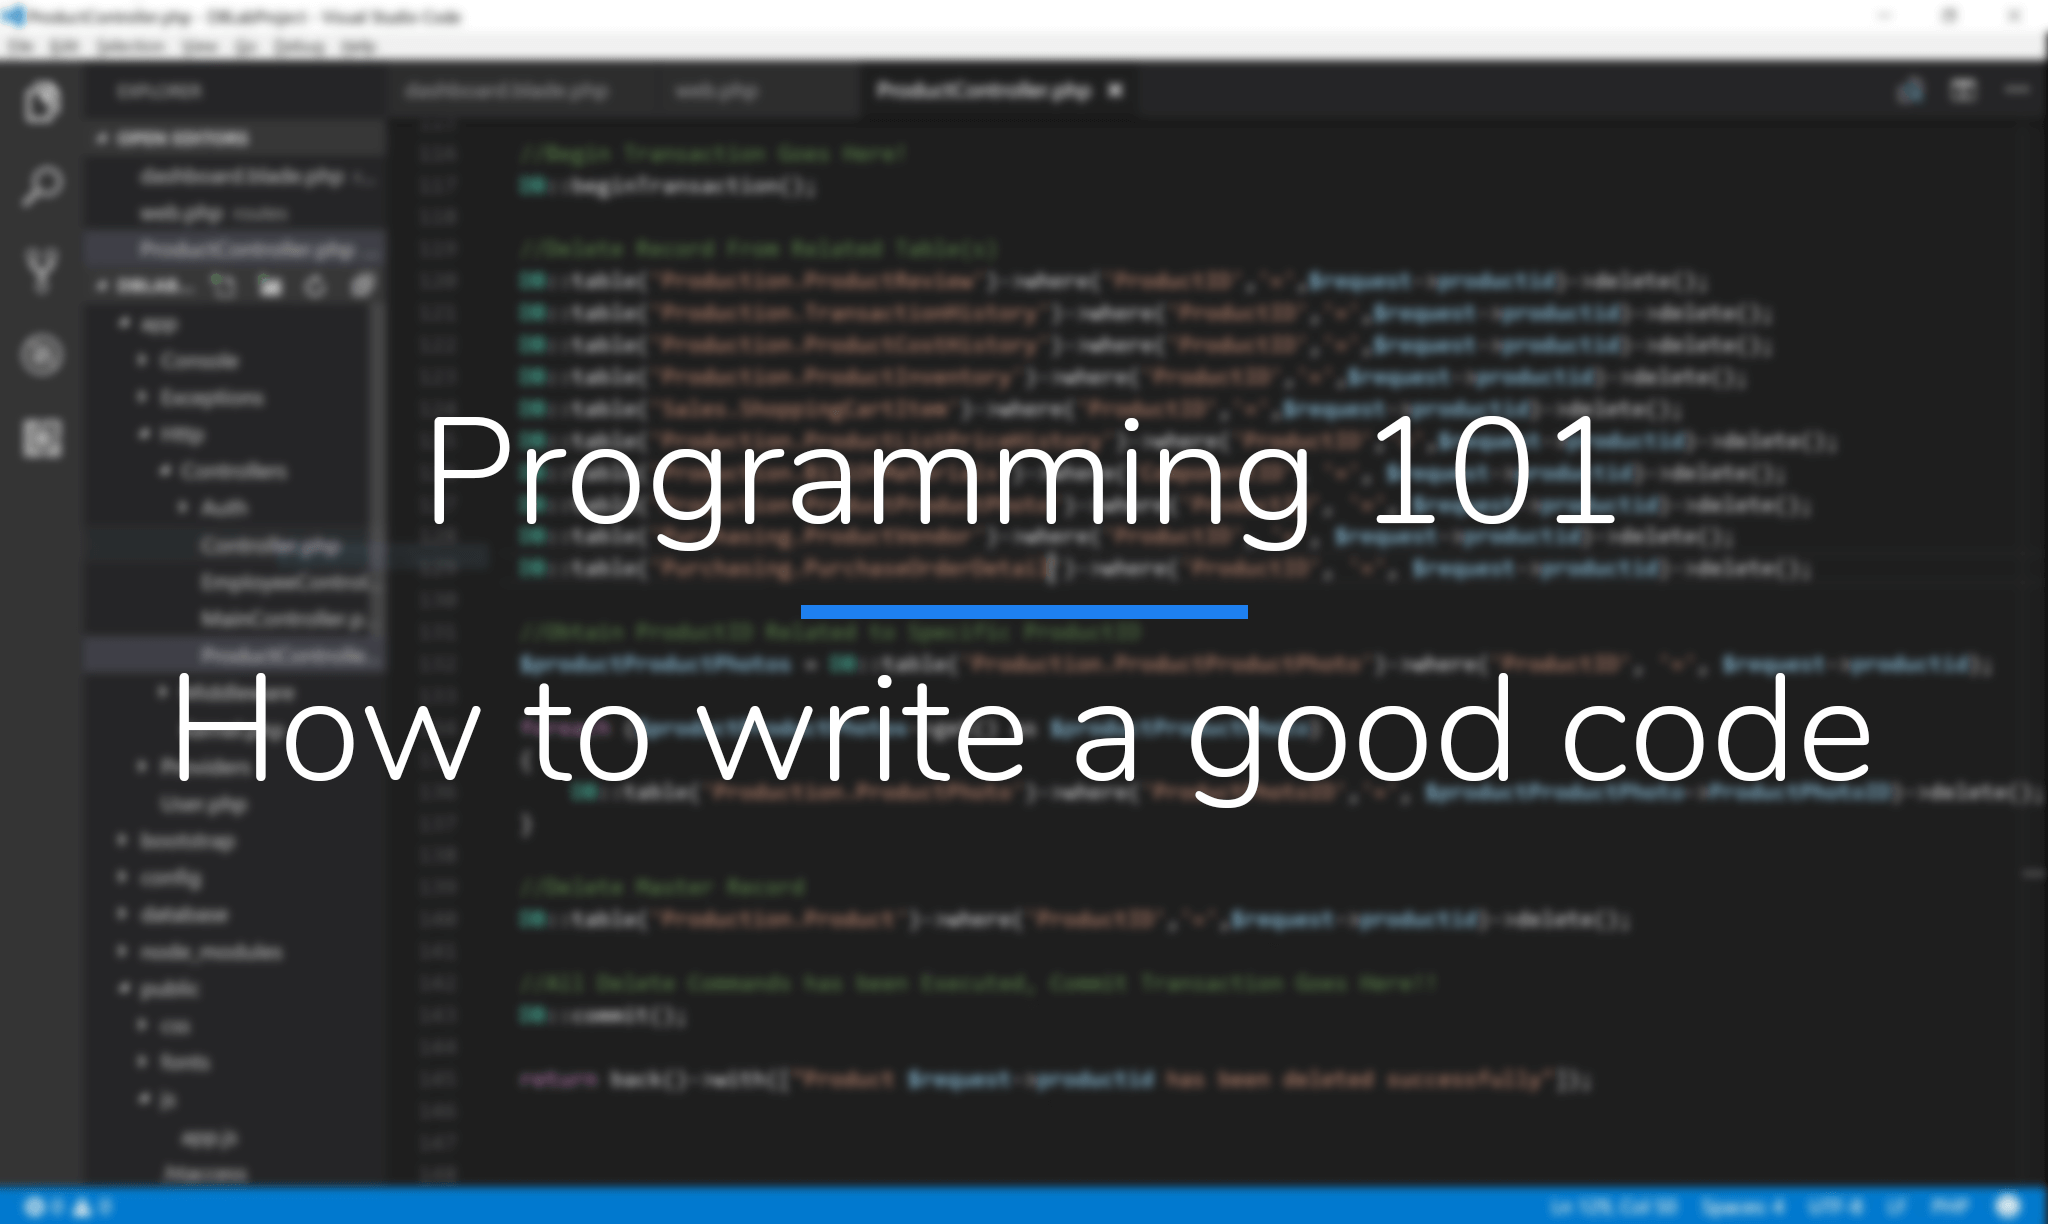 Programming 101 - How to write a good code